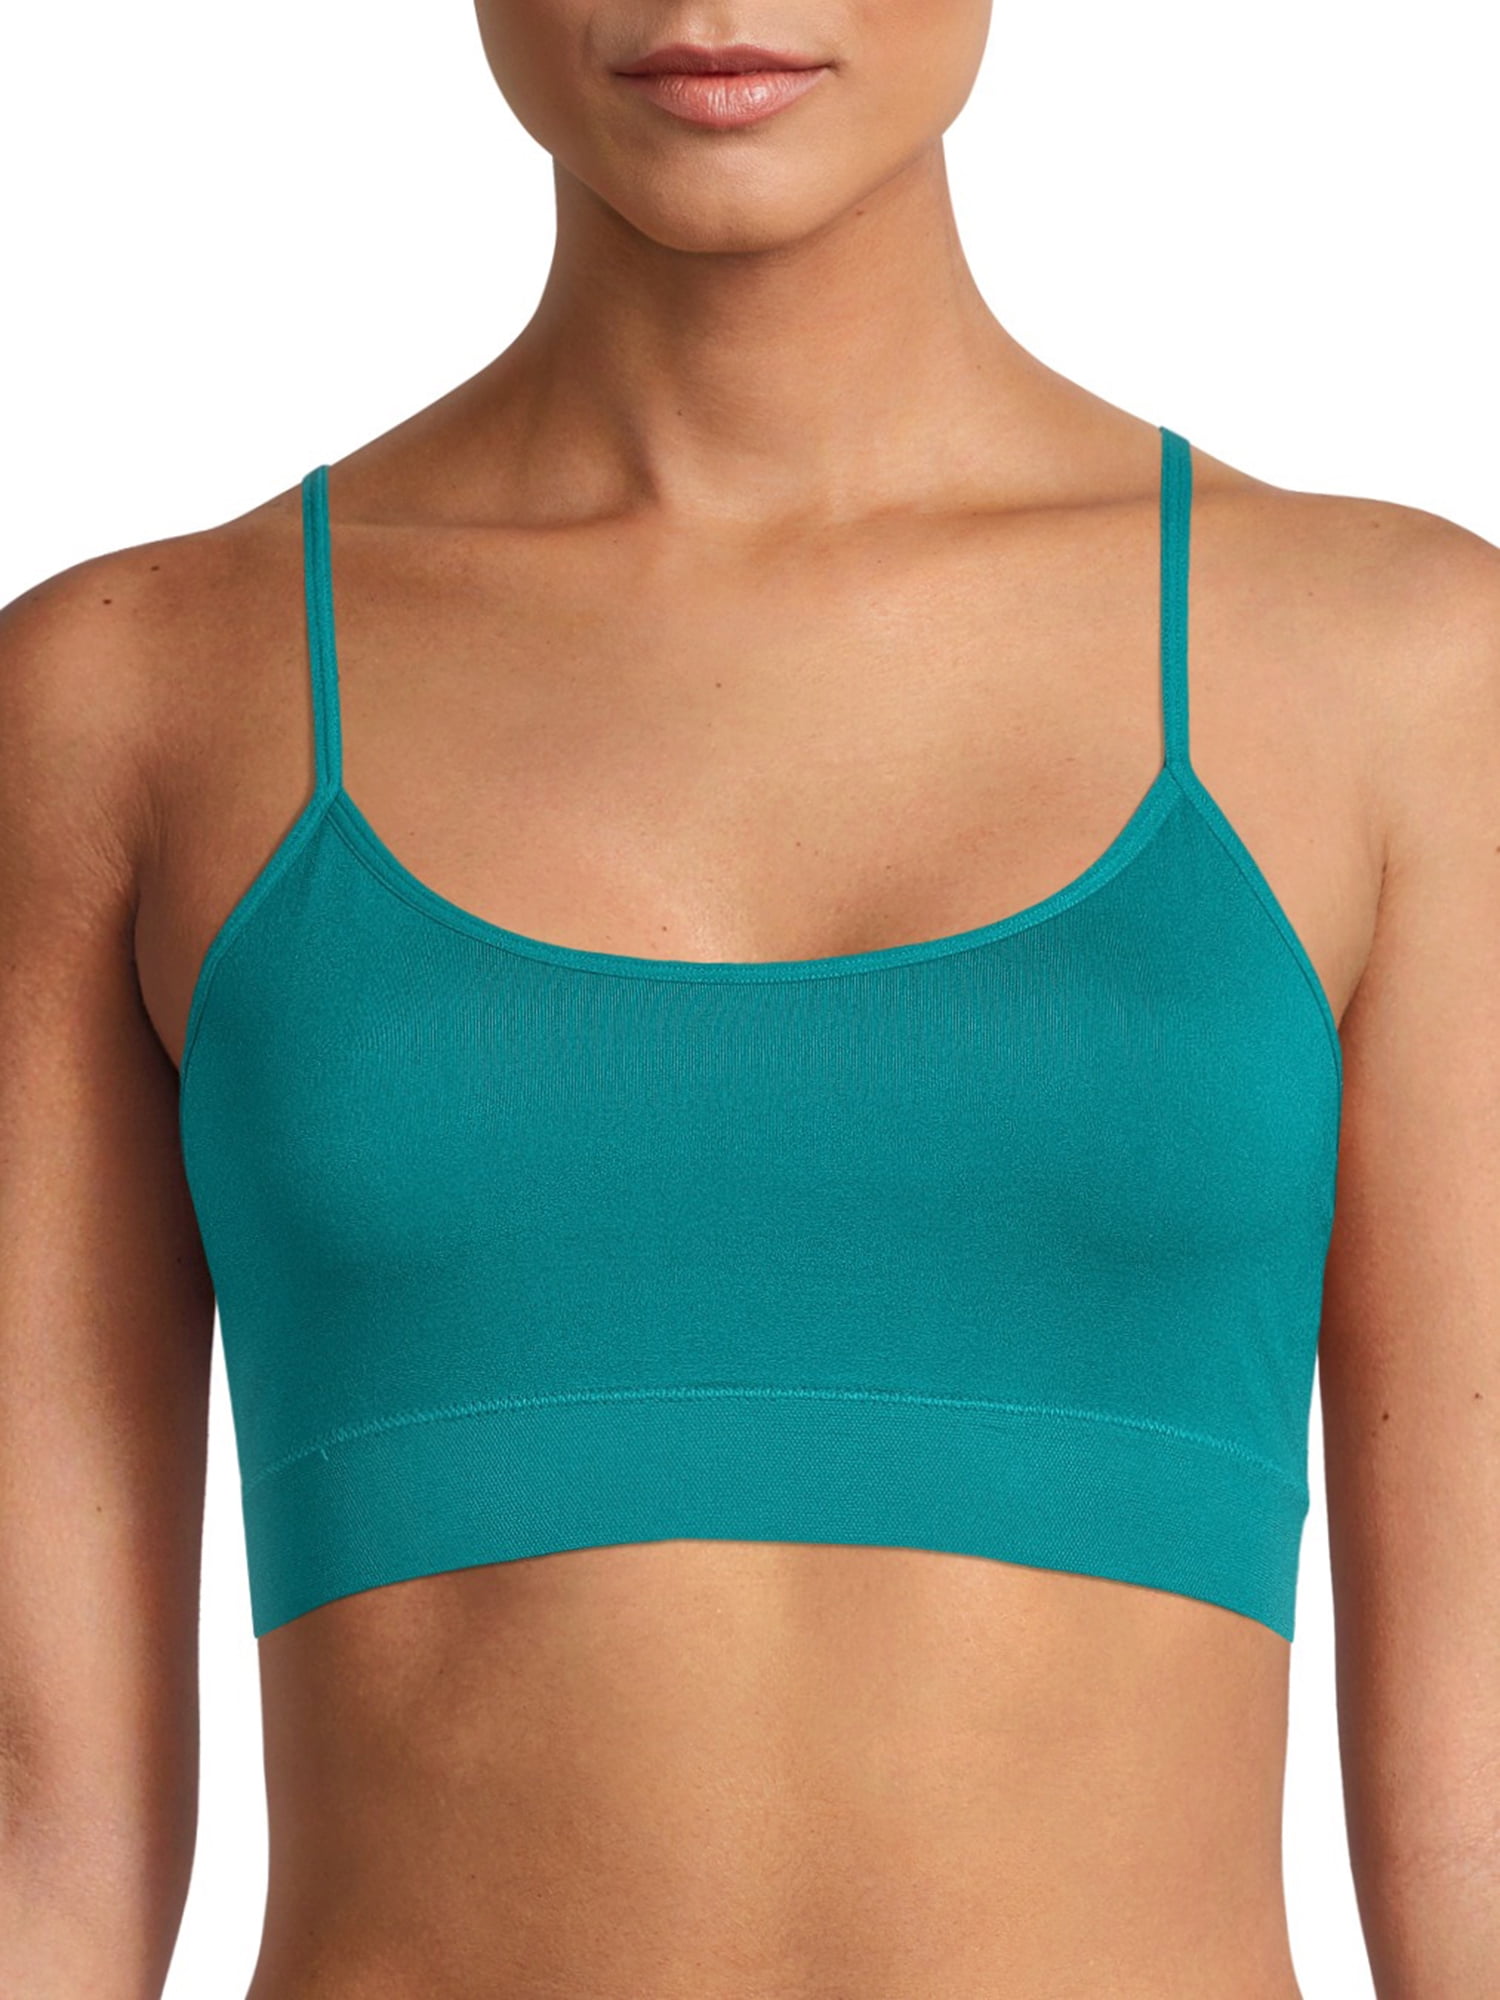 Whoa, wait. Walmart? - These cami bras by No Boundaries look so cute and so  comfy! $6.96 in @walmart stores and online- swipe up in our stories!  #whoawaitwalmart #walmart #affordablefashion #fallstyle #comfy